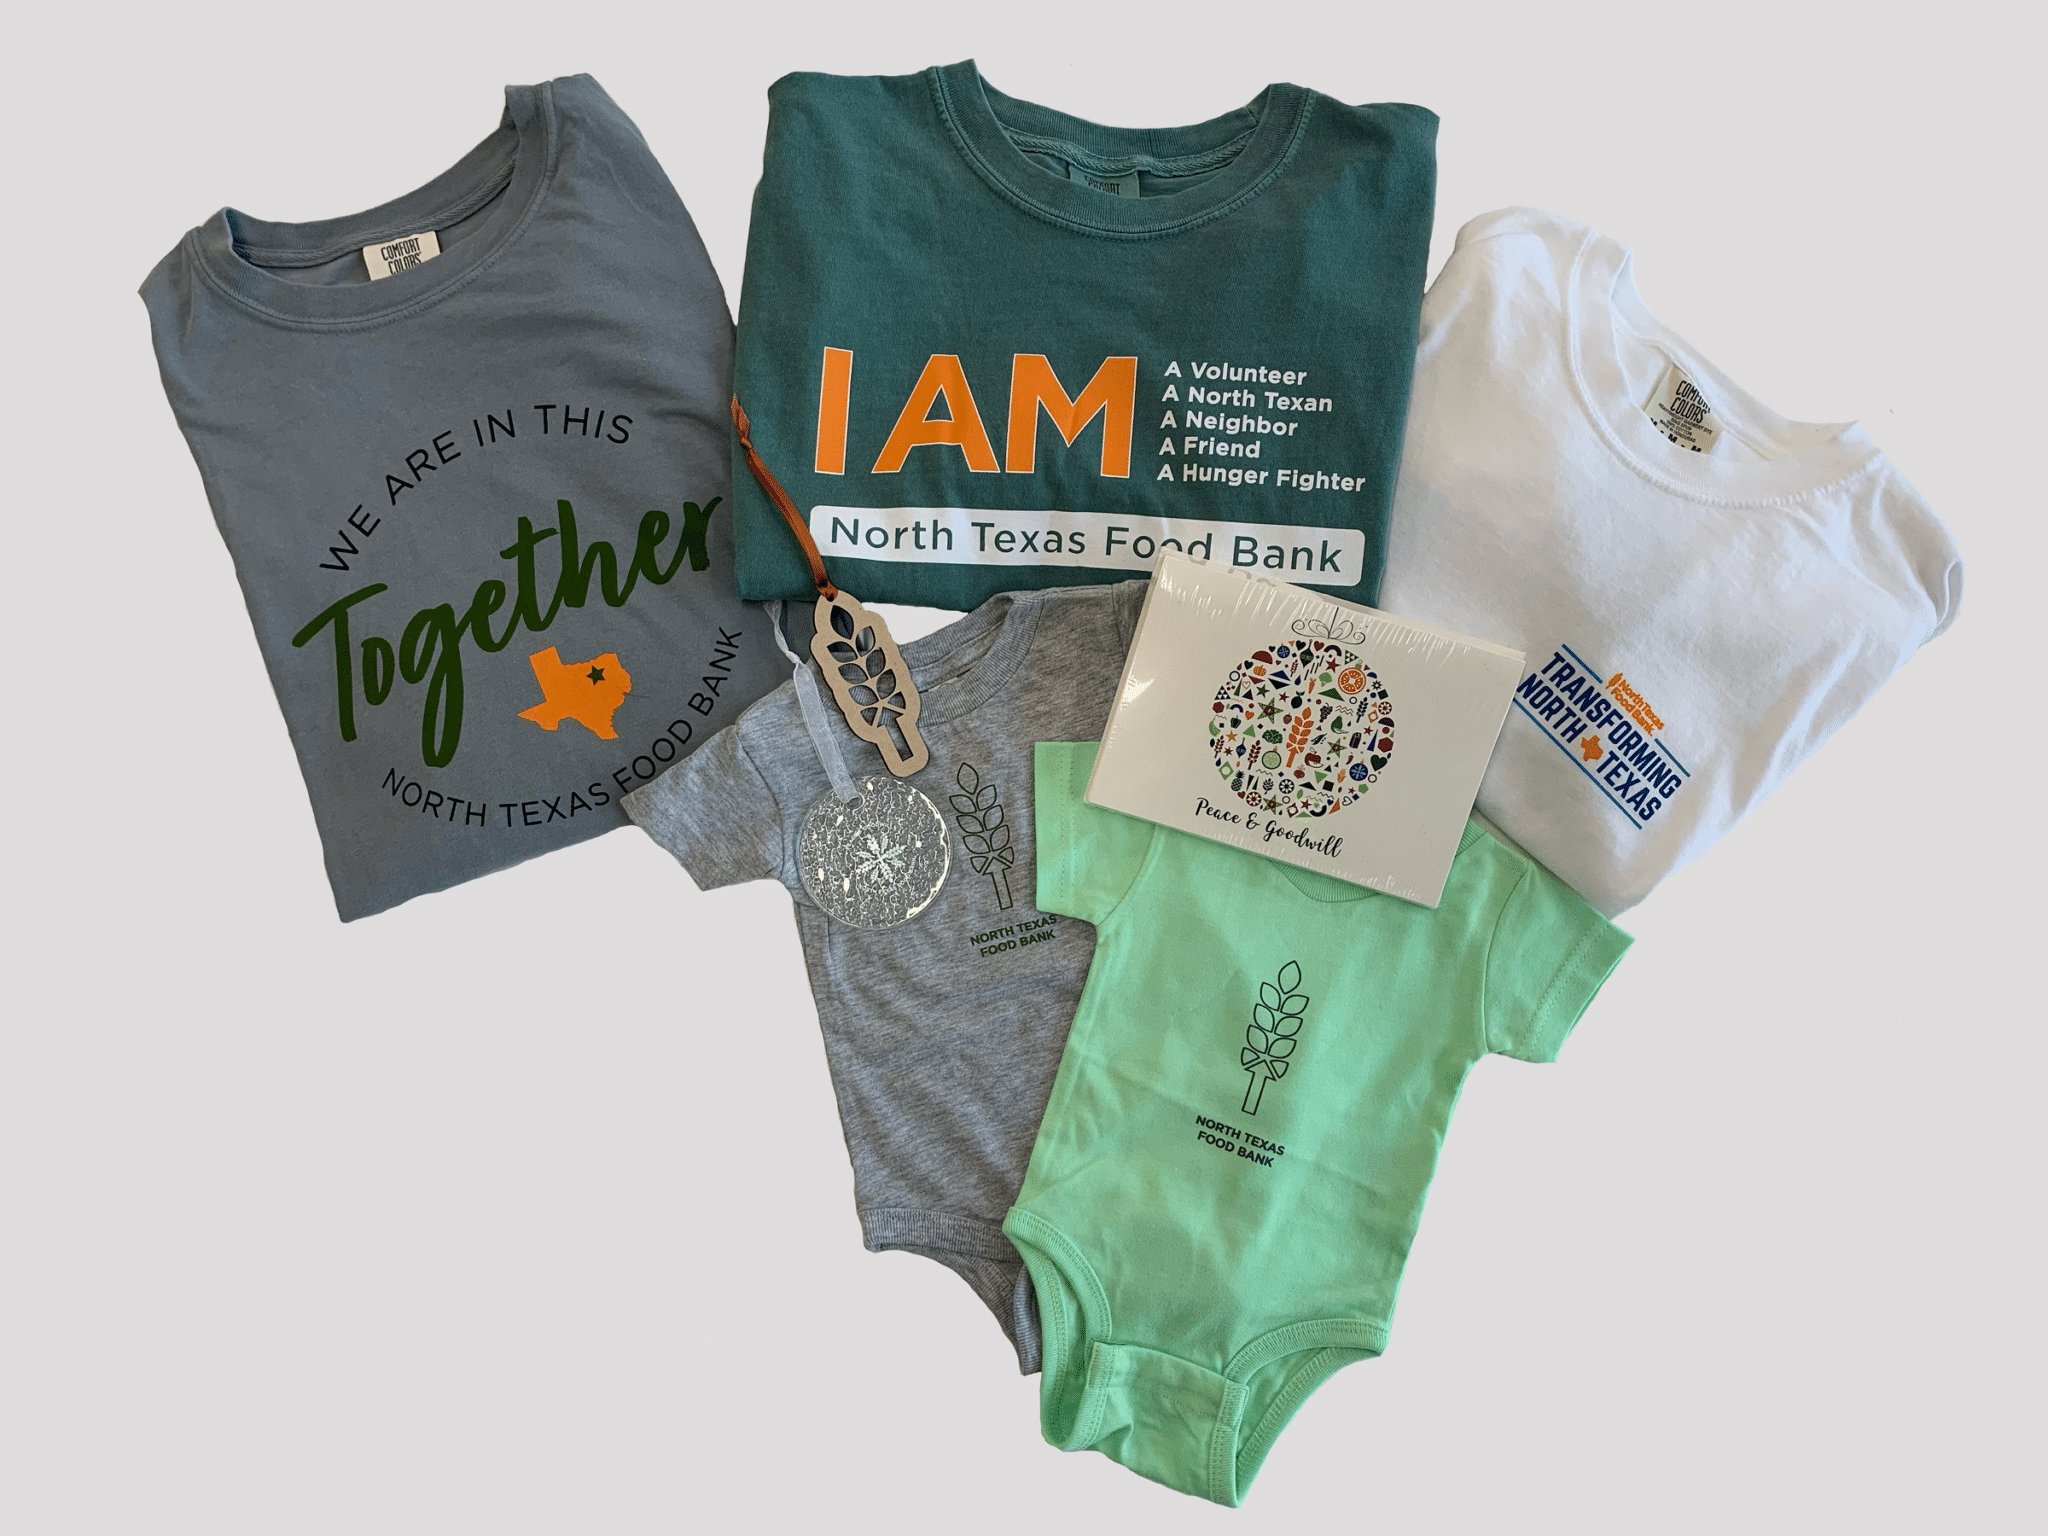 North Texas Food Bank e-store items including t-shirts, cards, onesies, and ornaments